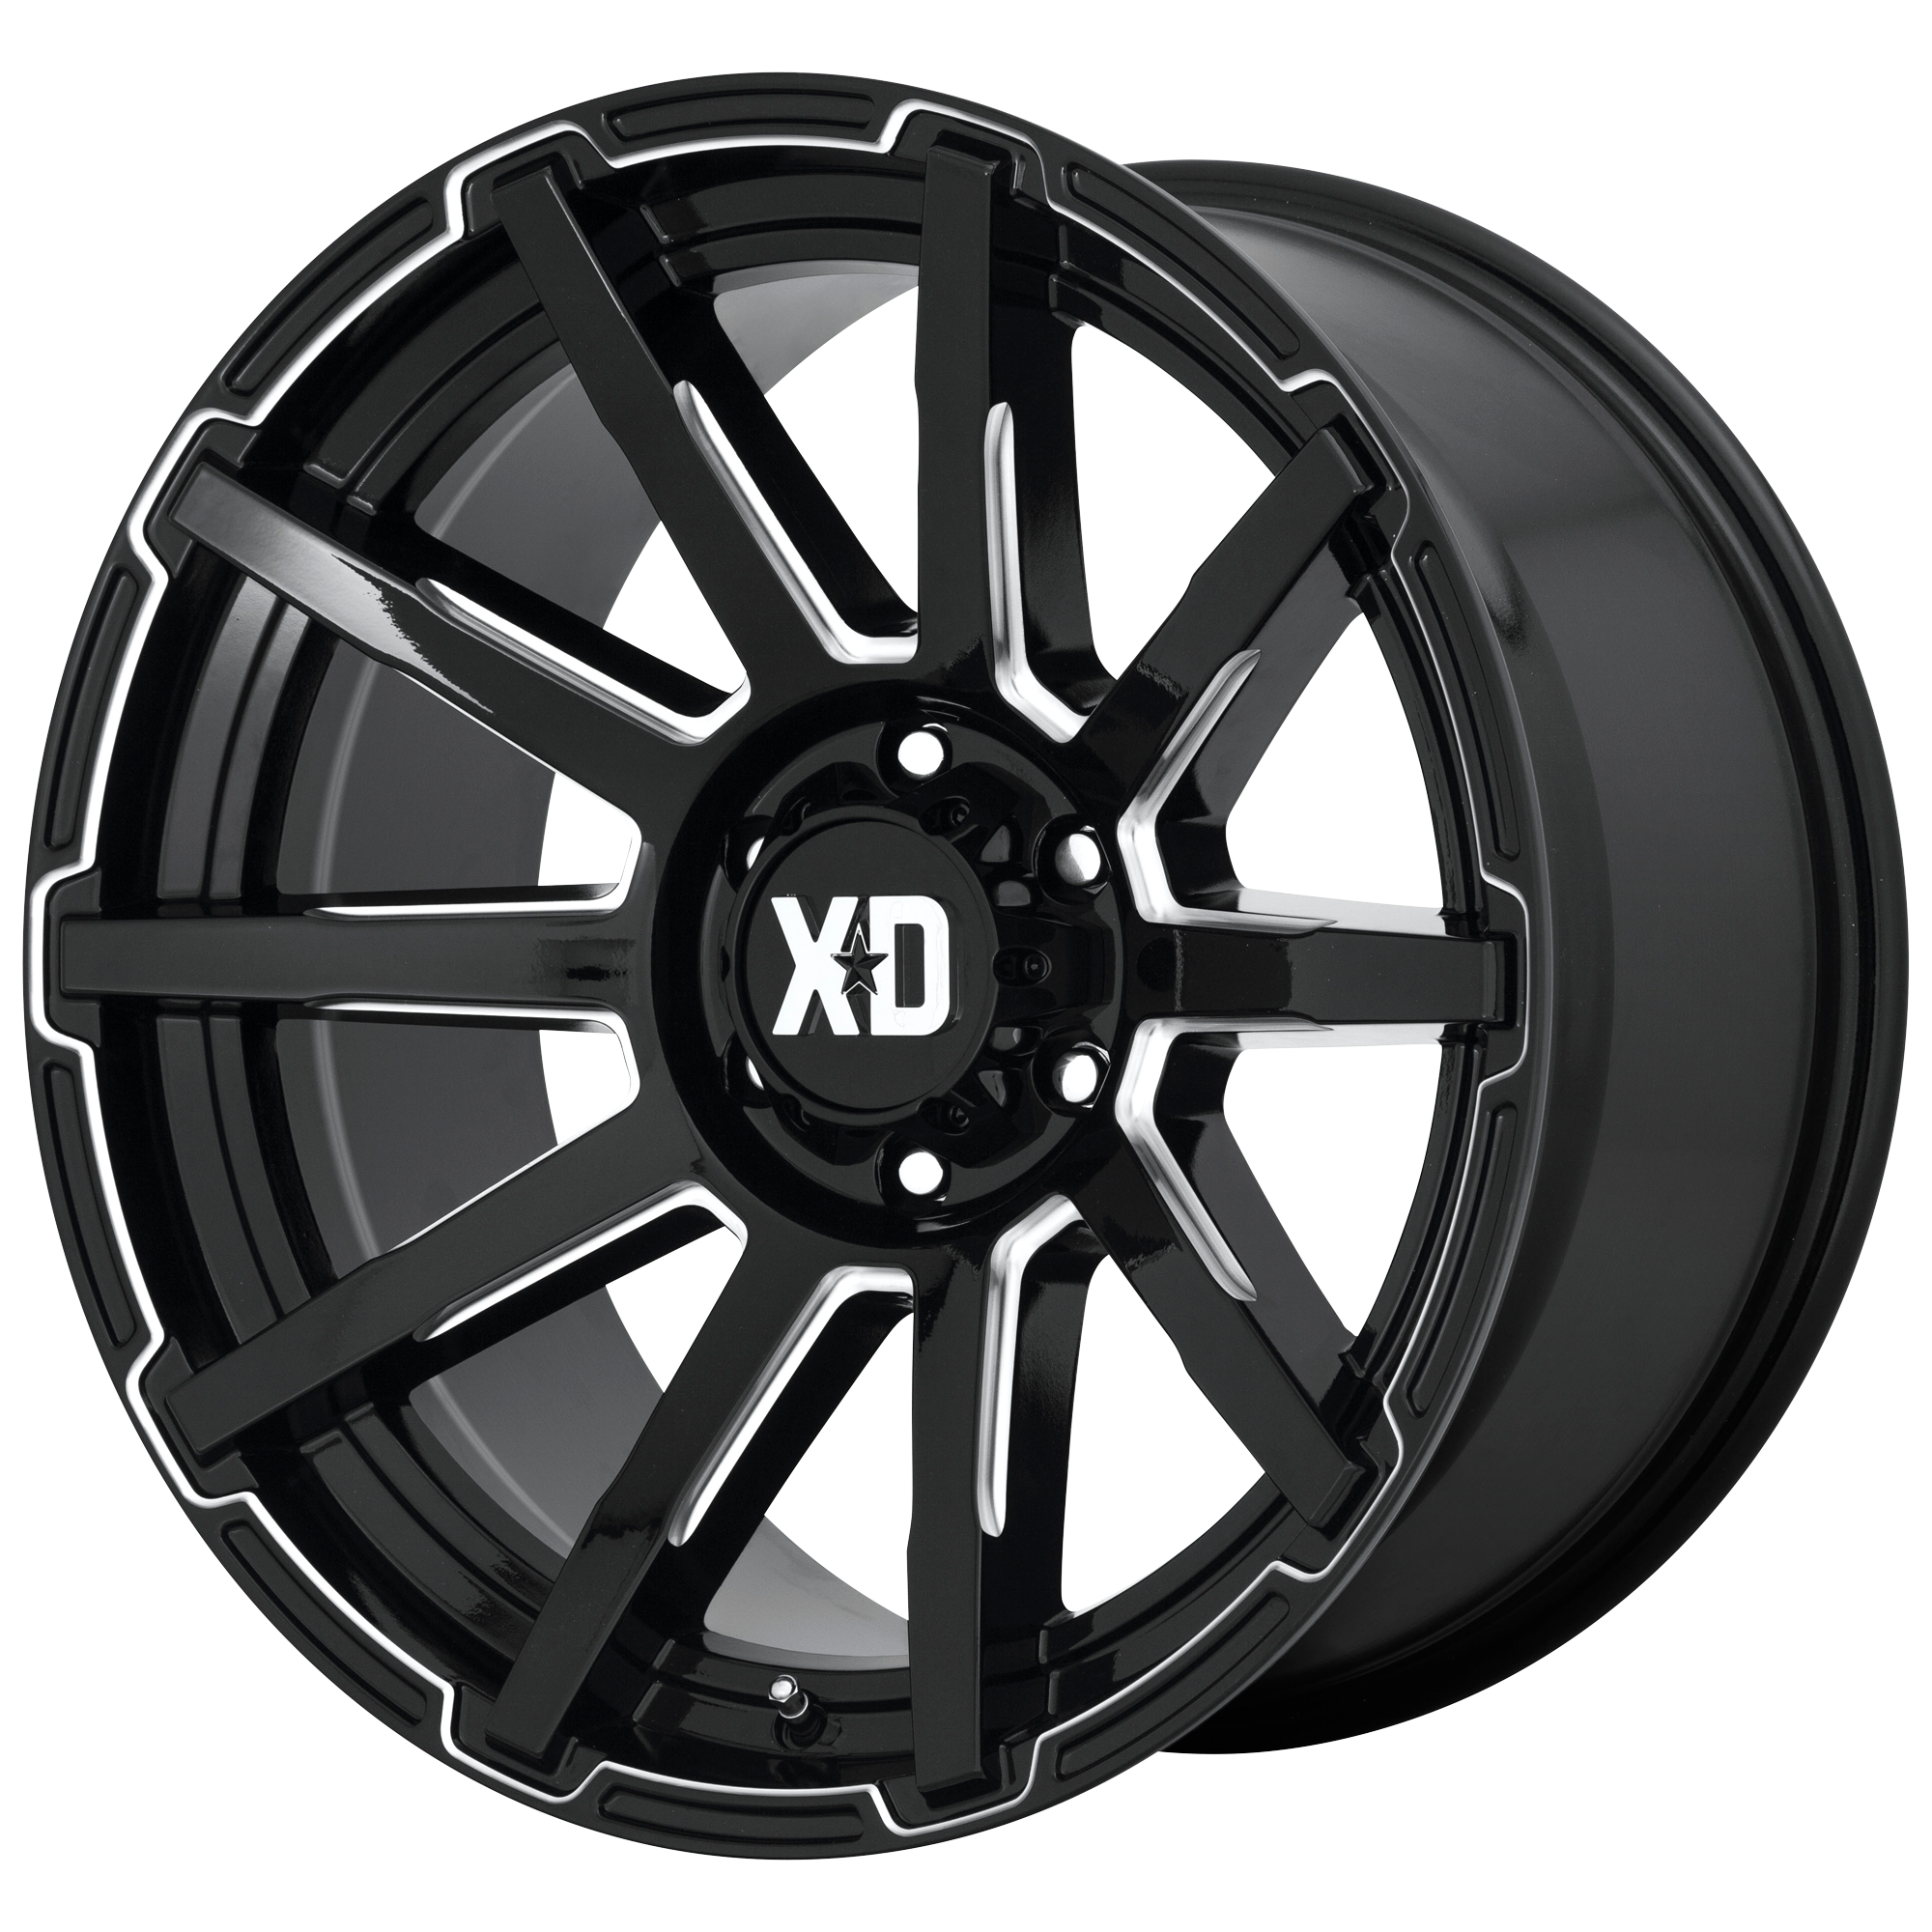 OUTBREAK 18x9 6x120.00 GLOSS BLACK MILLED (0 mm) - Tires and Engine Performance